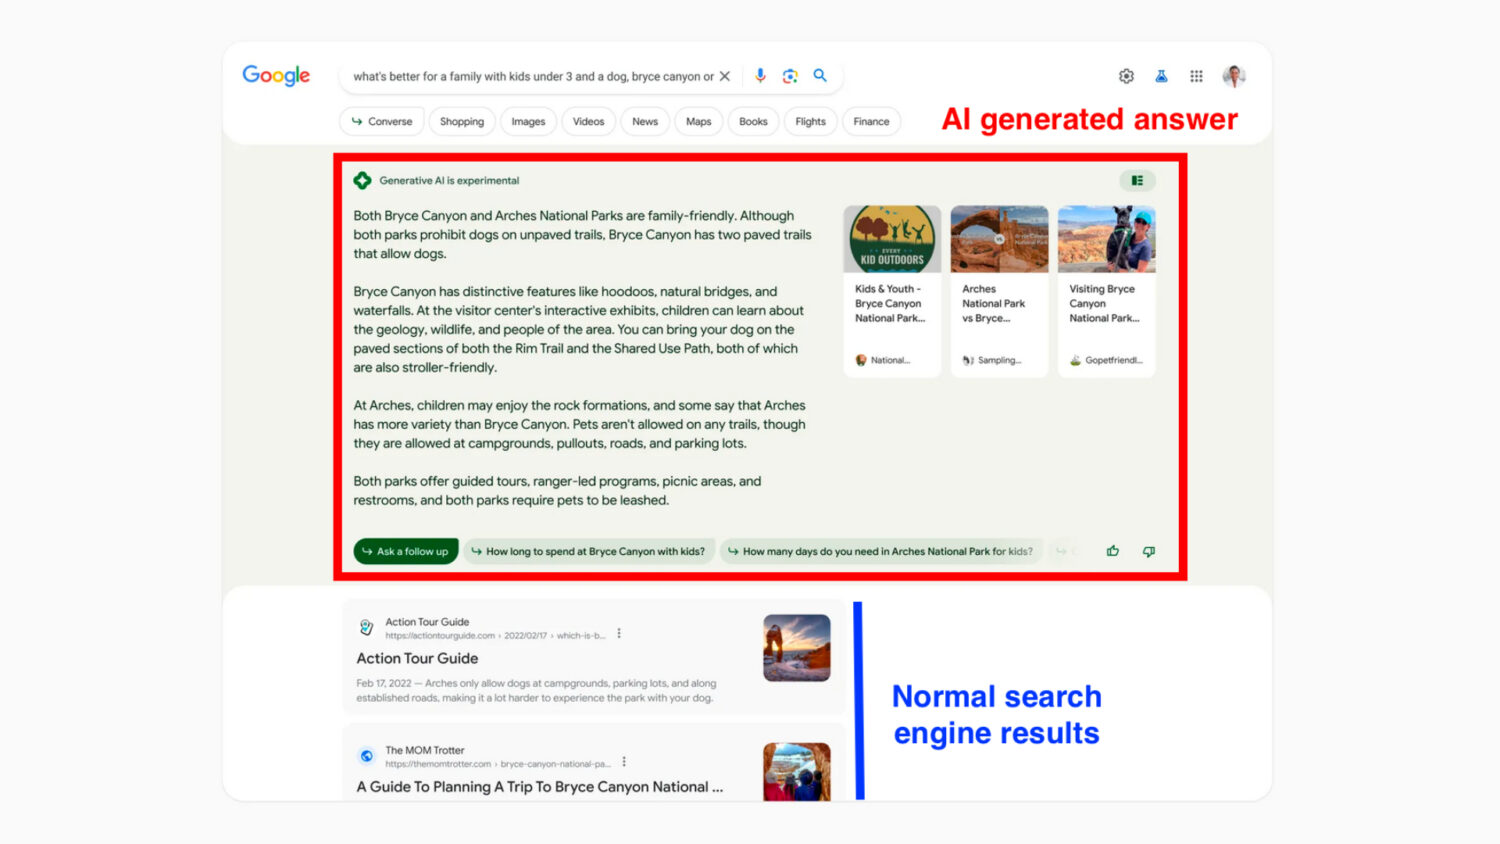 Google AI Summary and Search Results